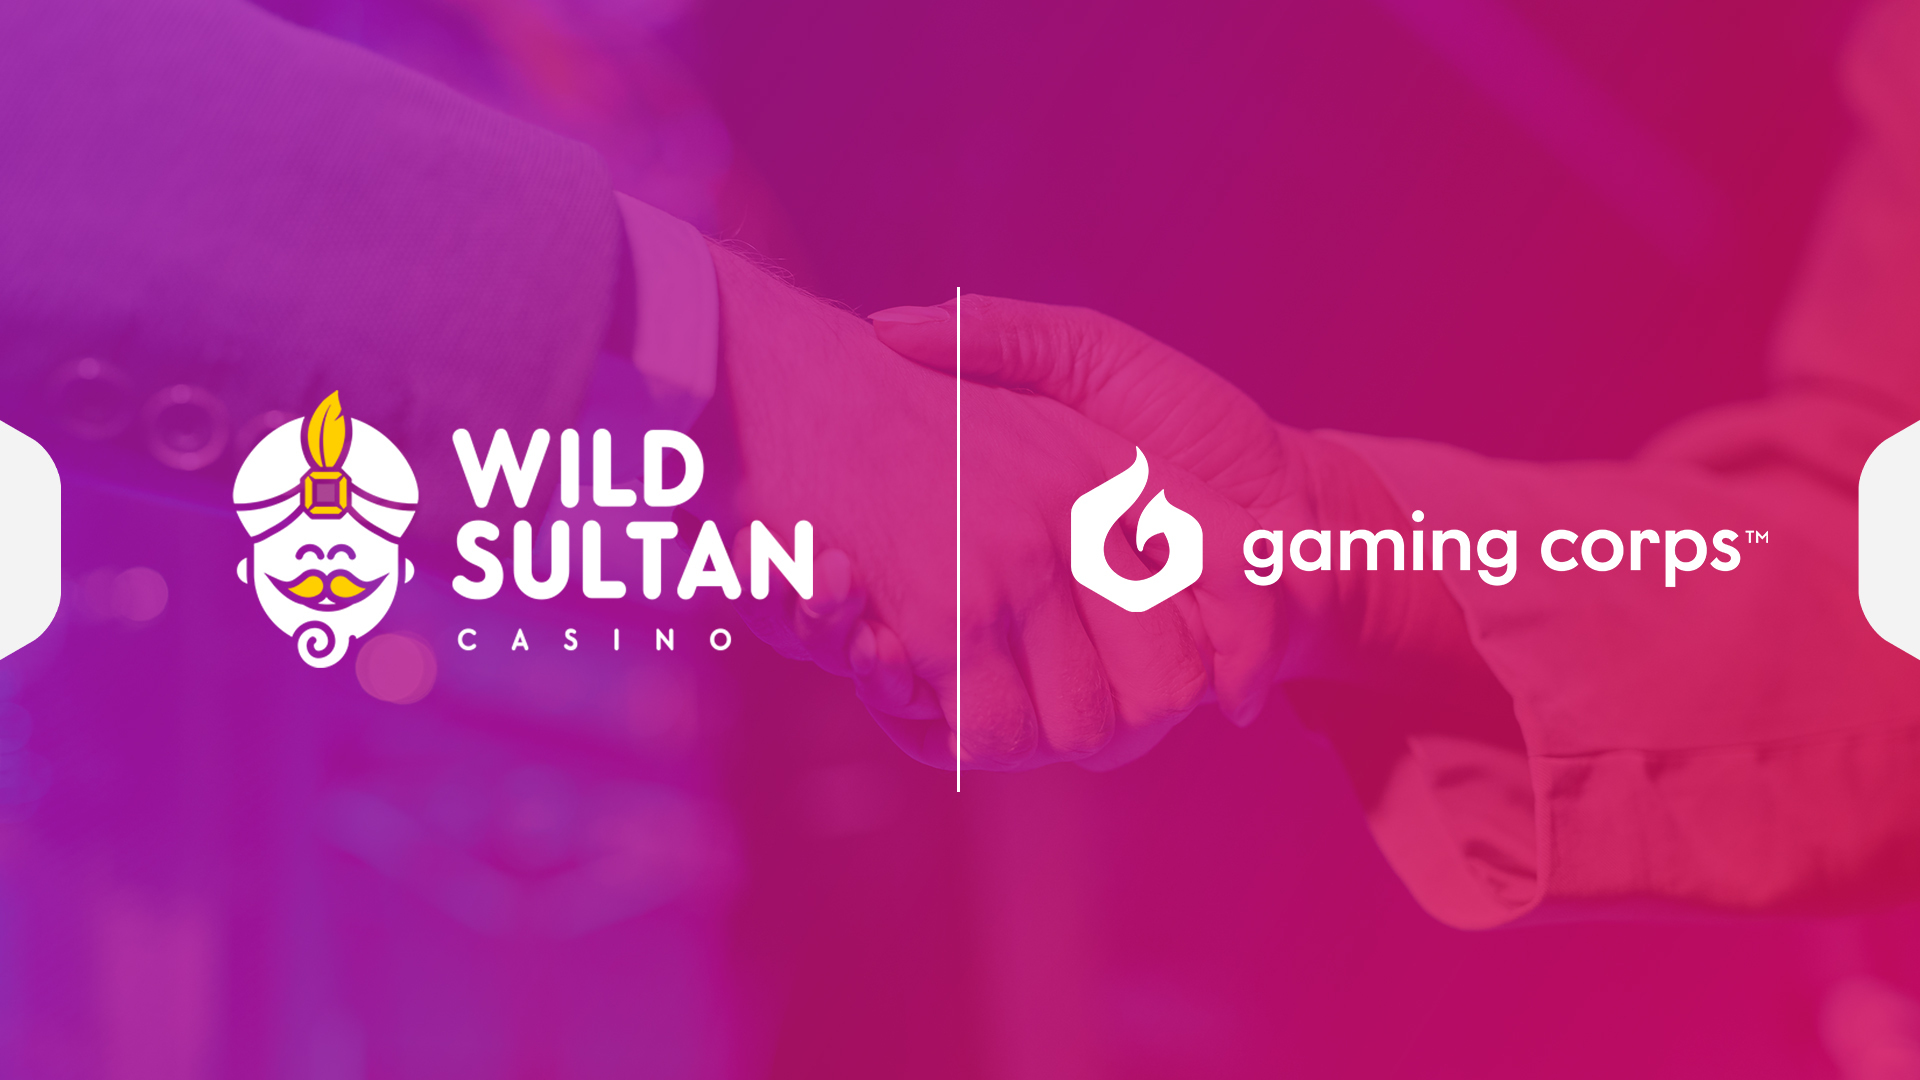 Gaming Corps Partners with Wild Sultan